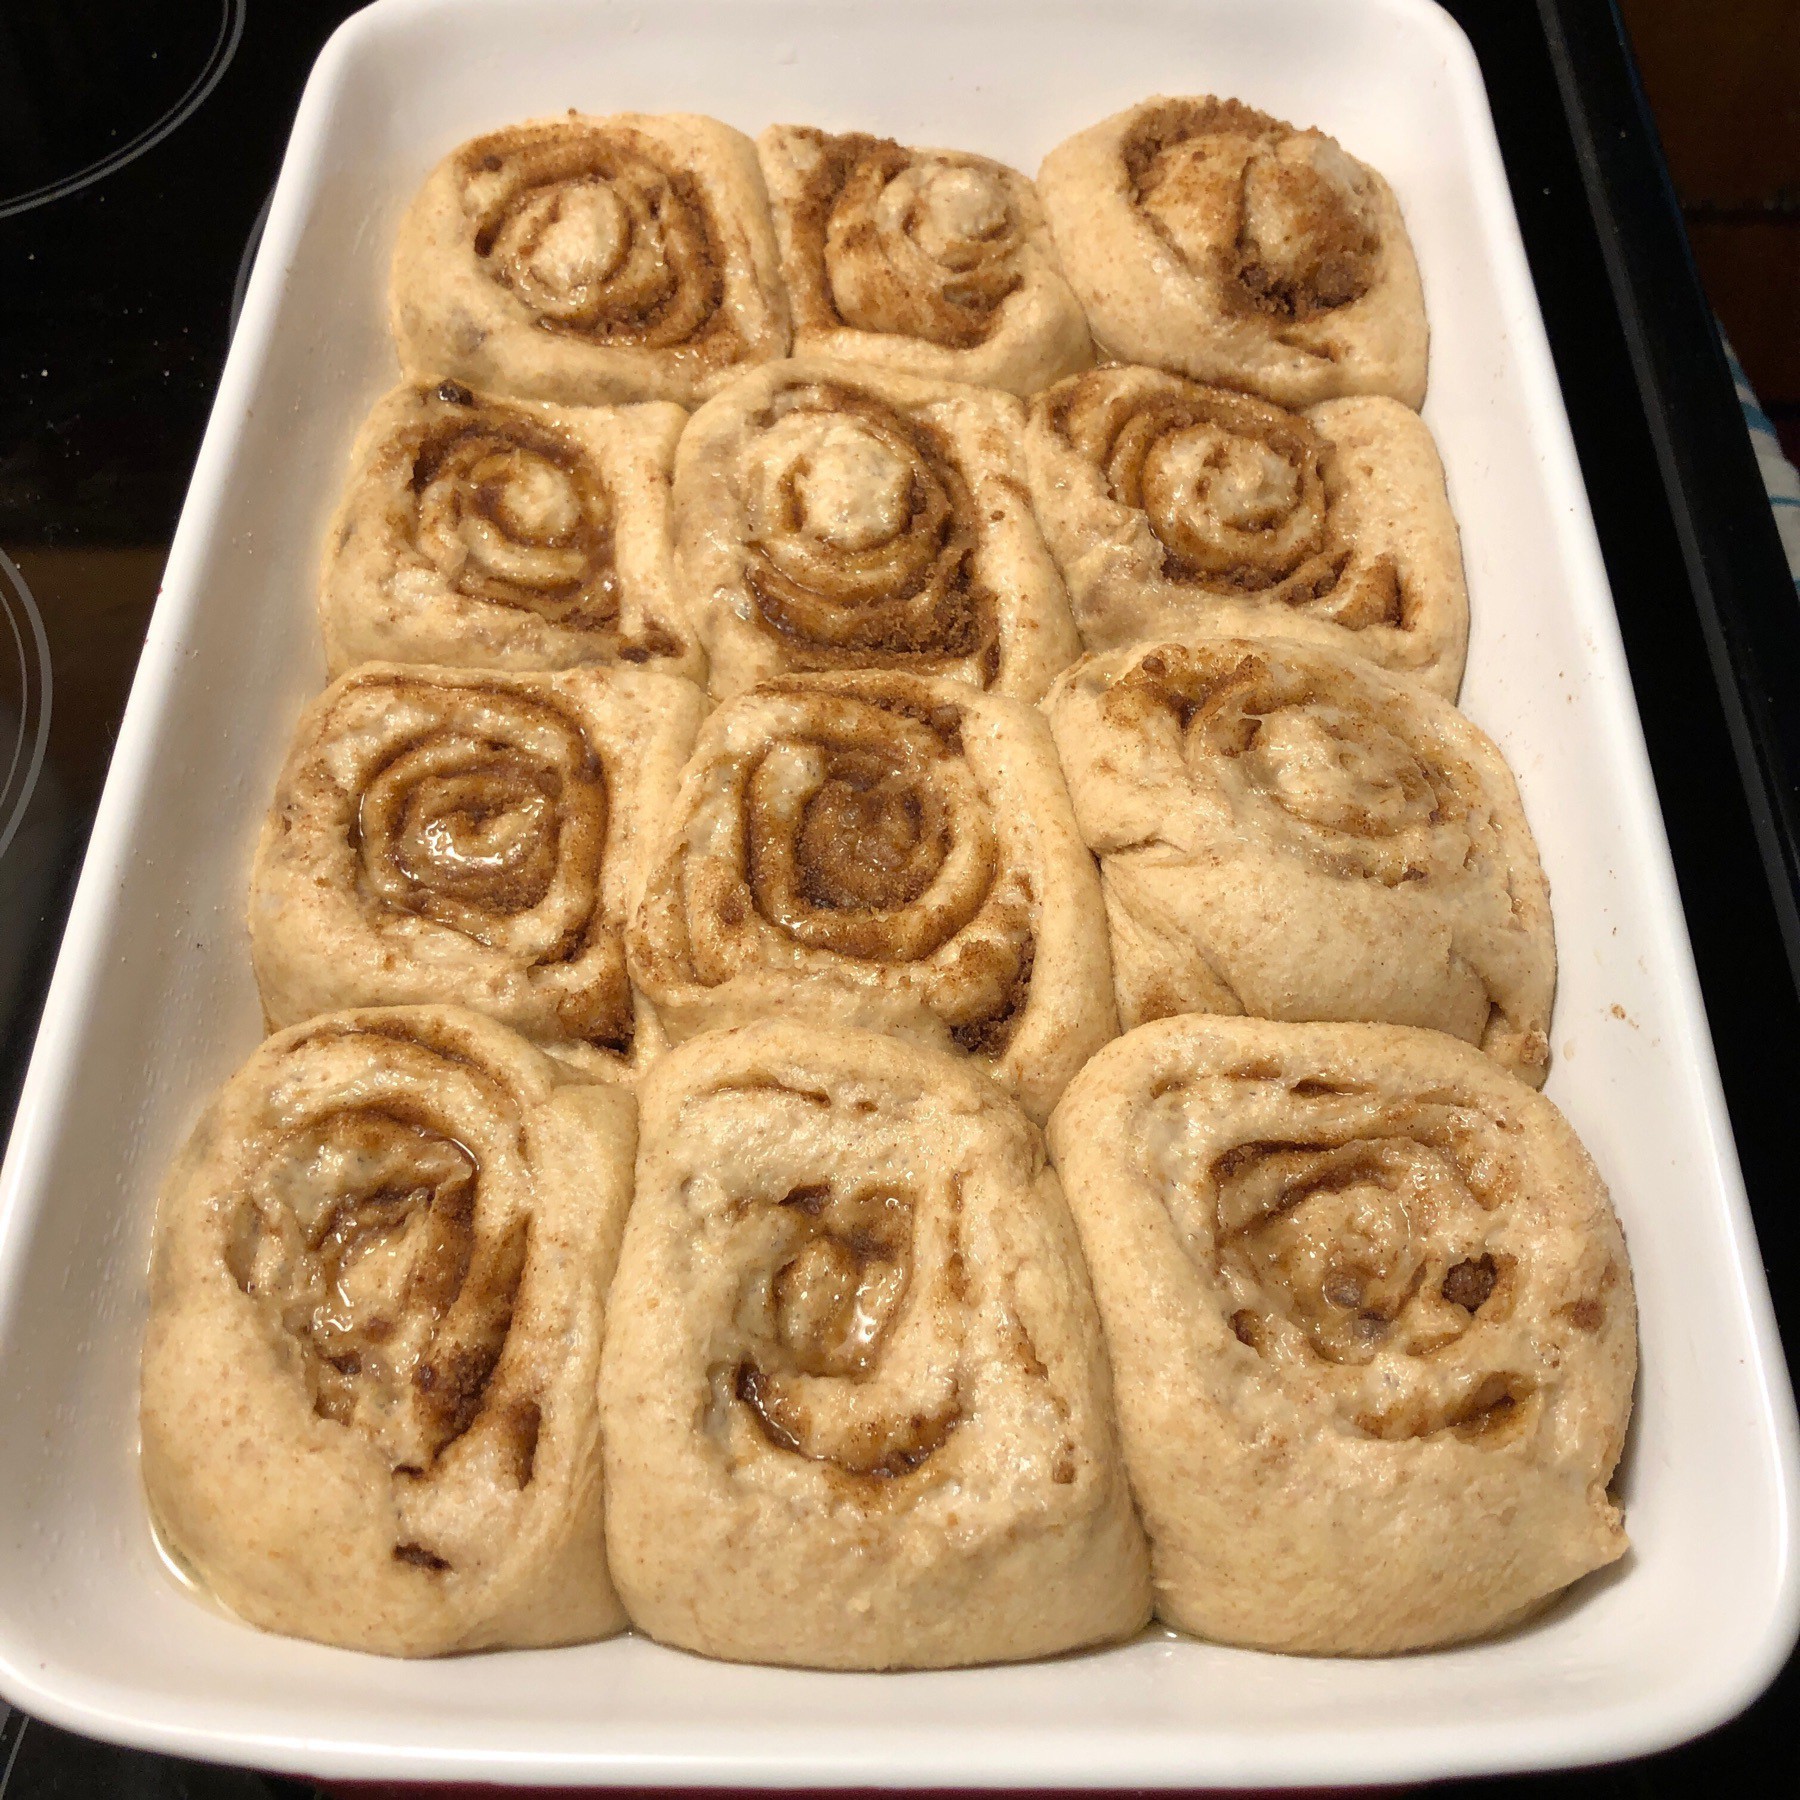 Cinnampn buns in pan after rising.